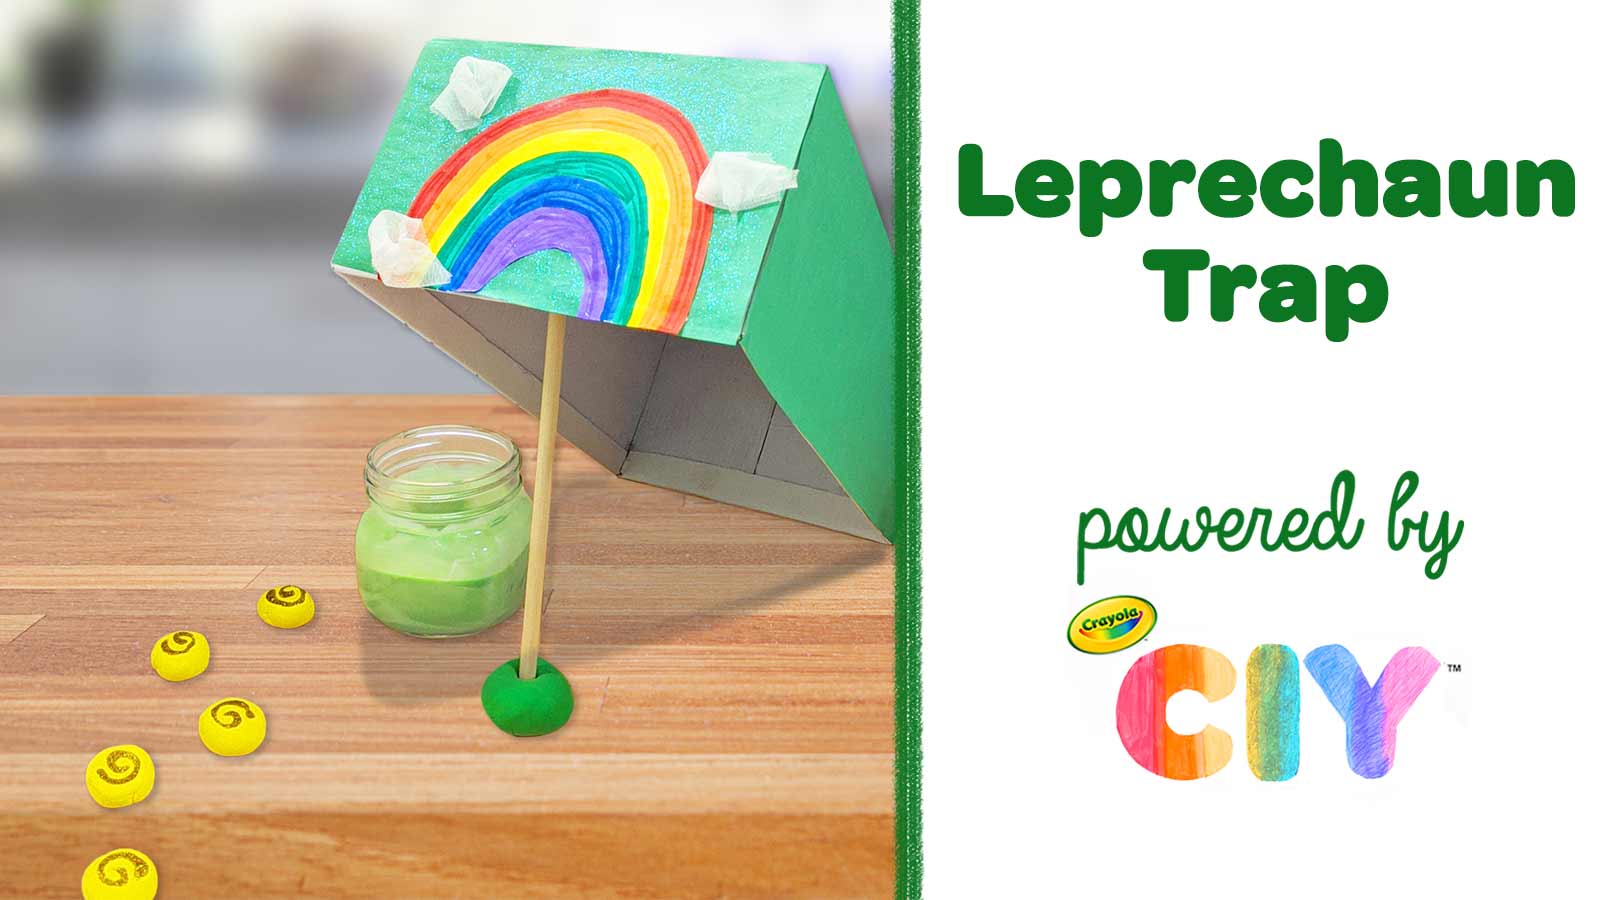 Simple DIY Leprechaun trap project for kids in under an hour!